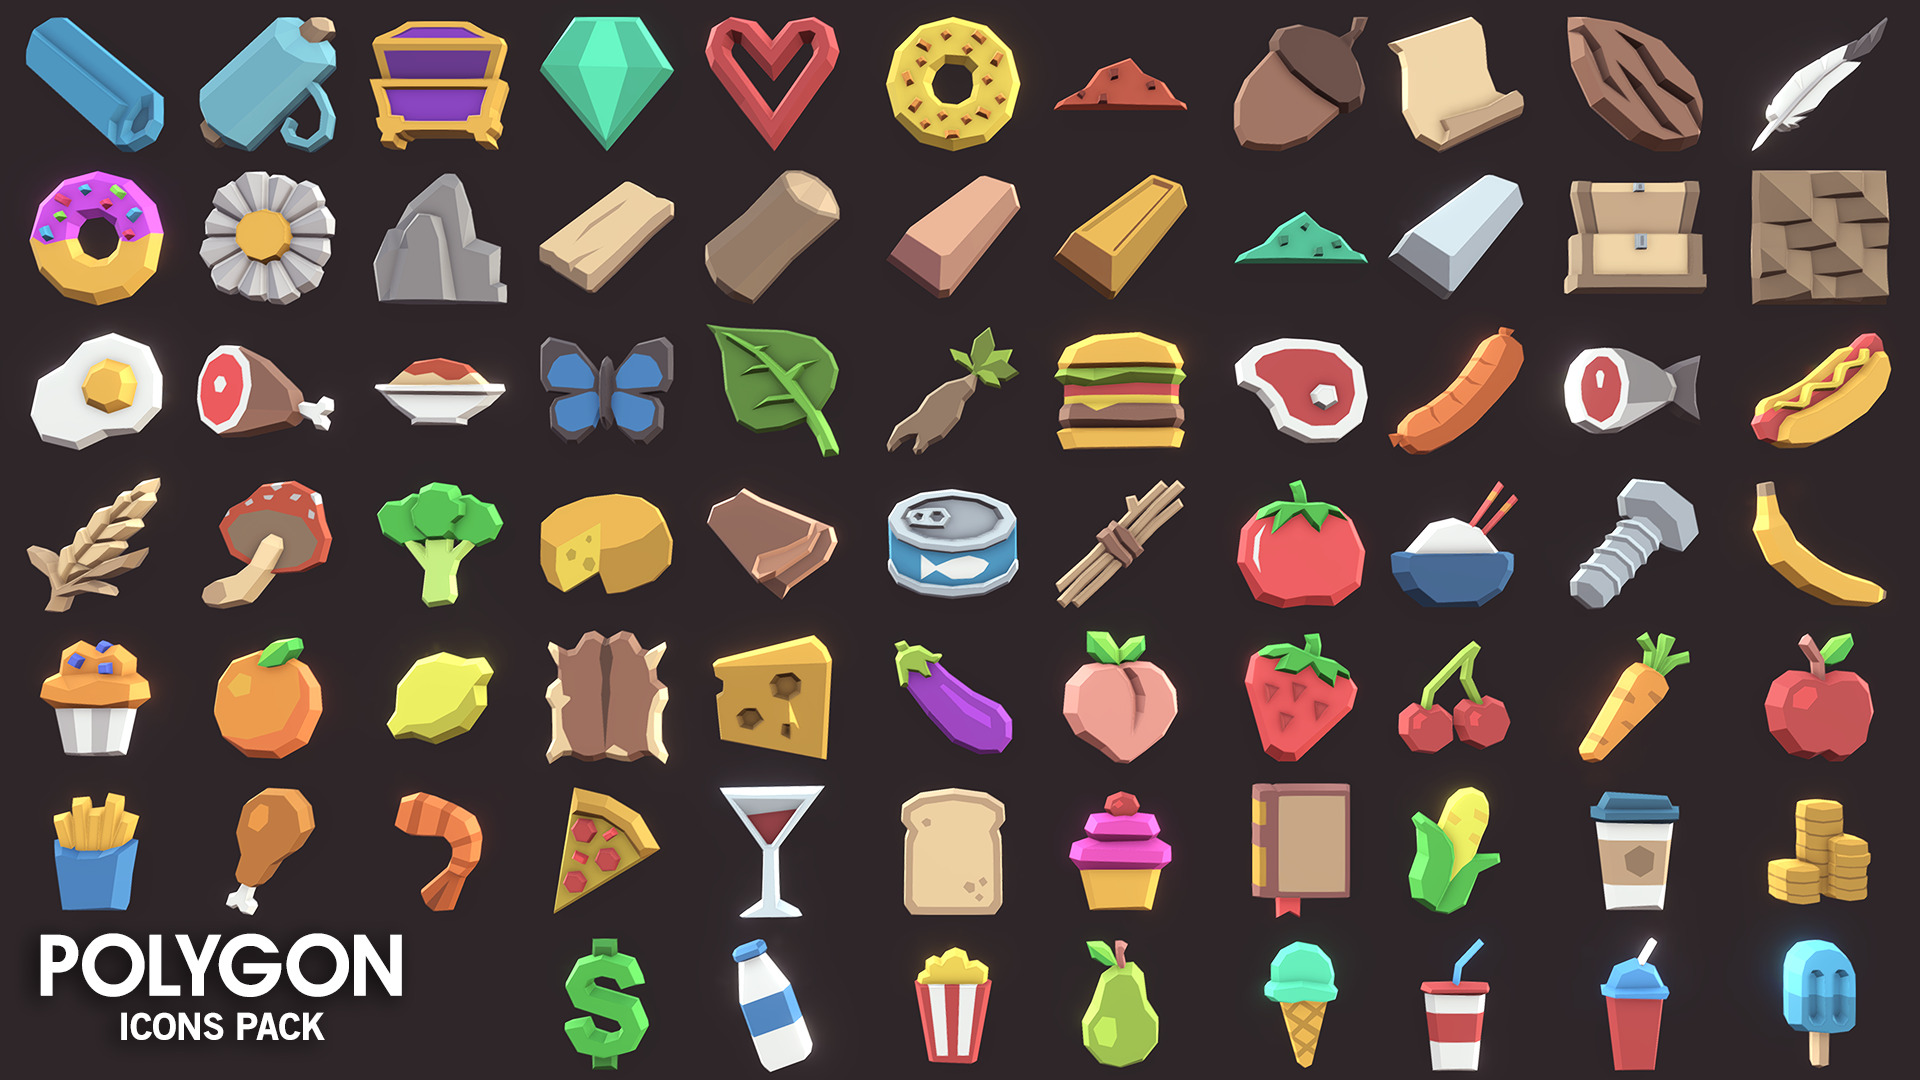 Icons low poly asset pack for gaming